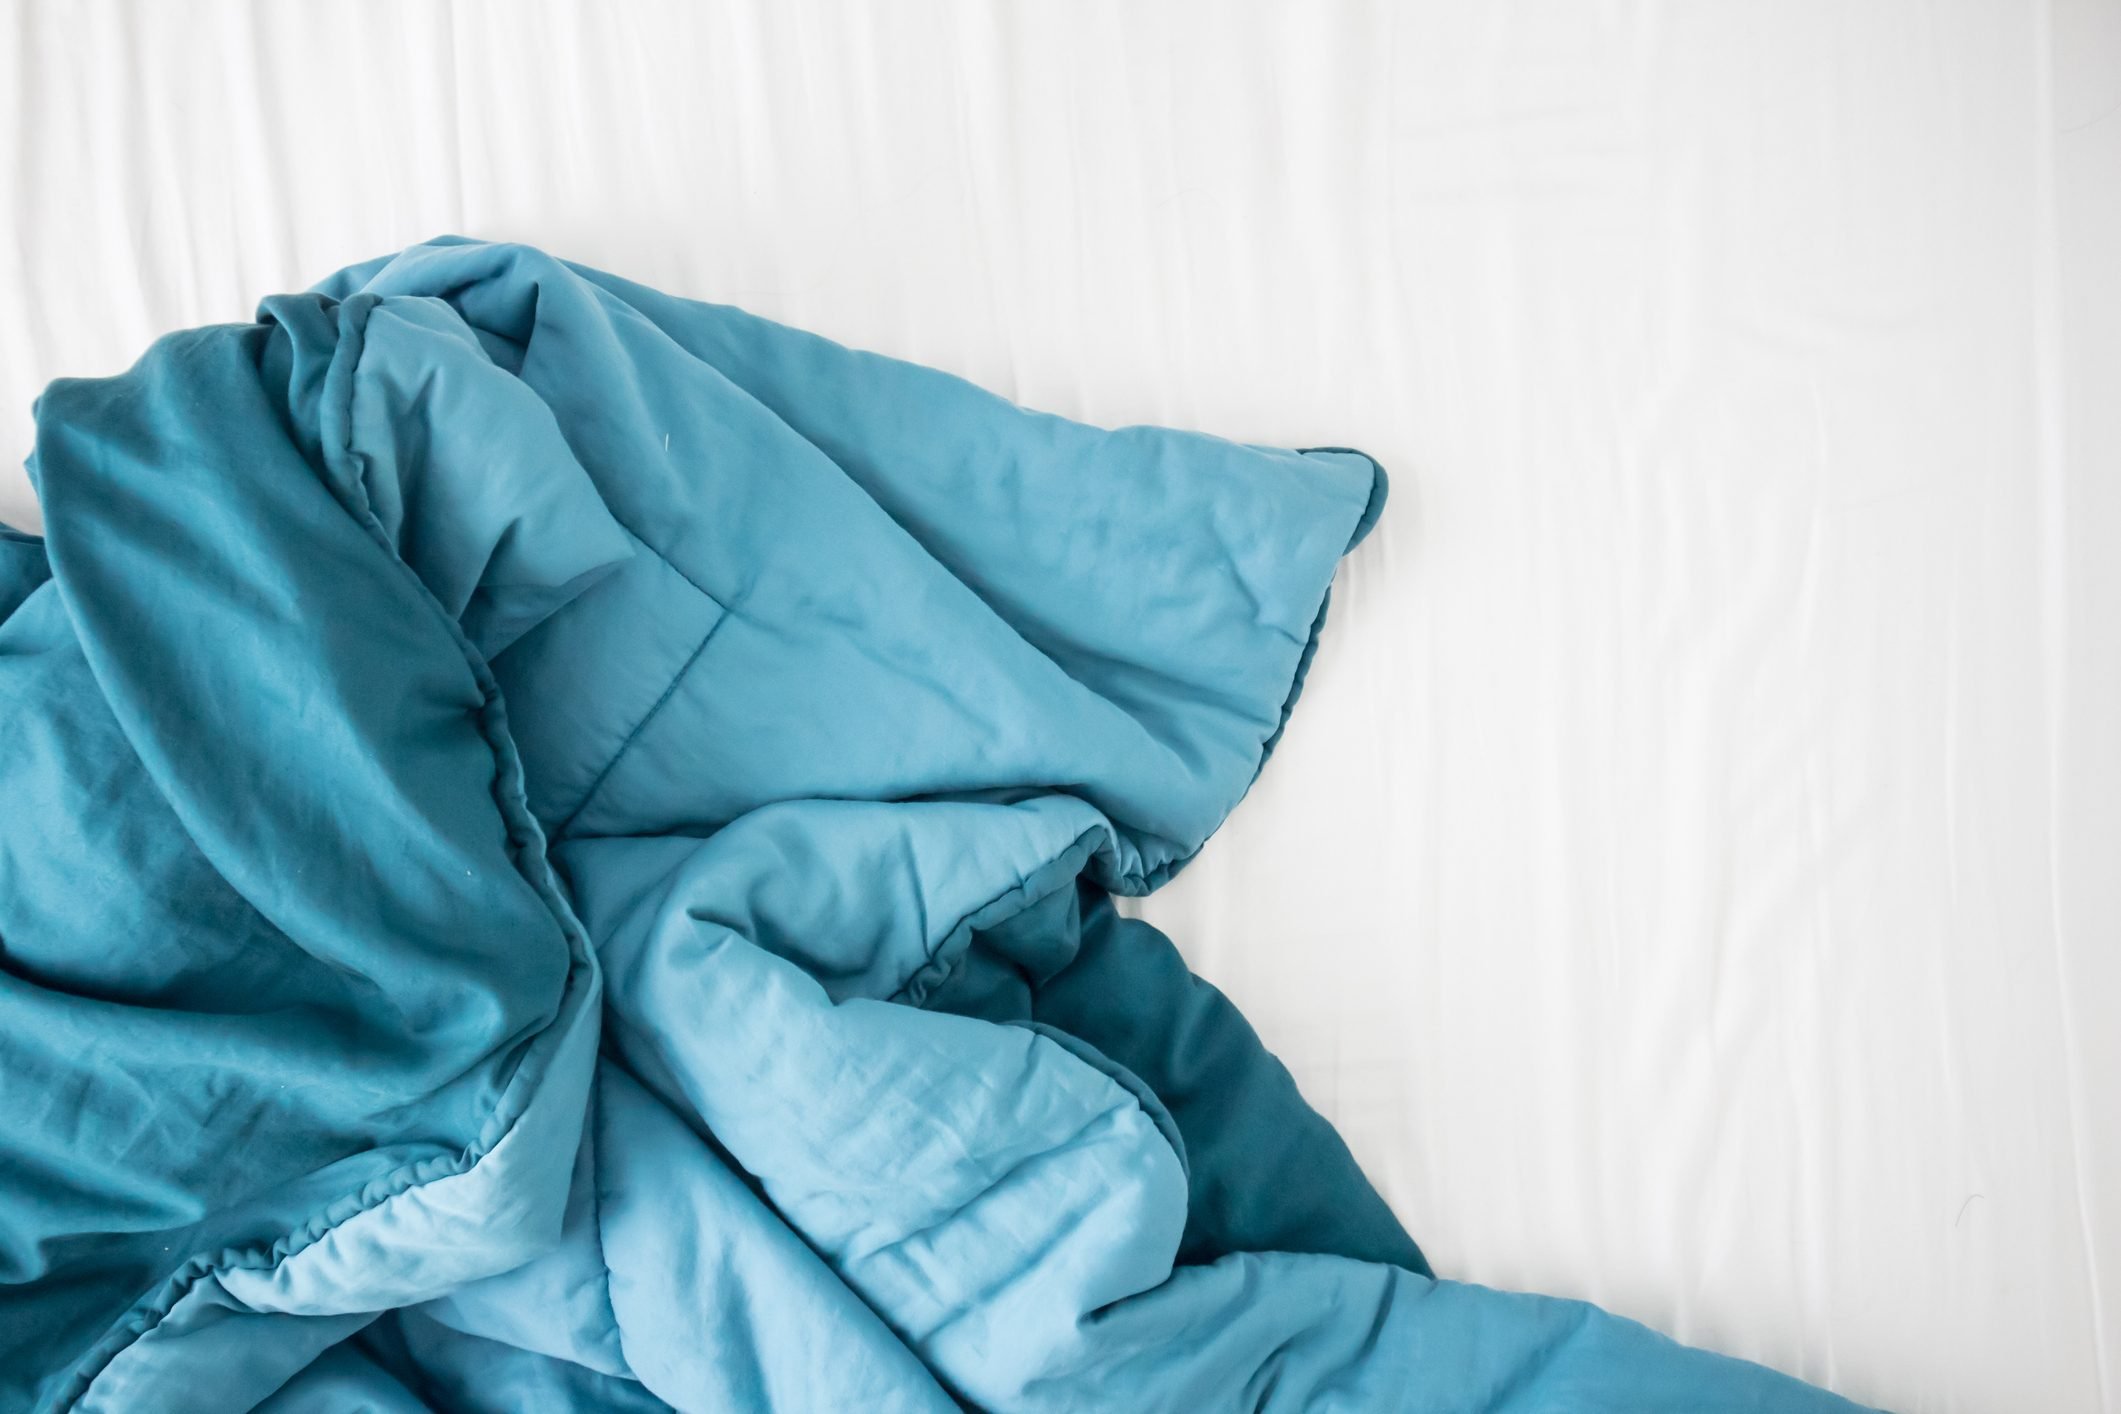 5 Things Doctors Need You to Know About Weighted Blankets